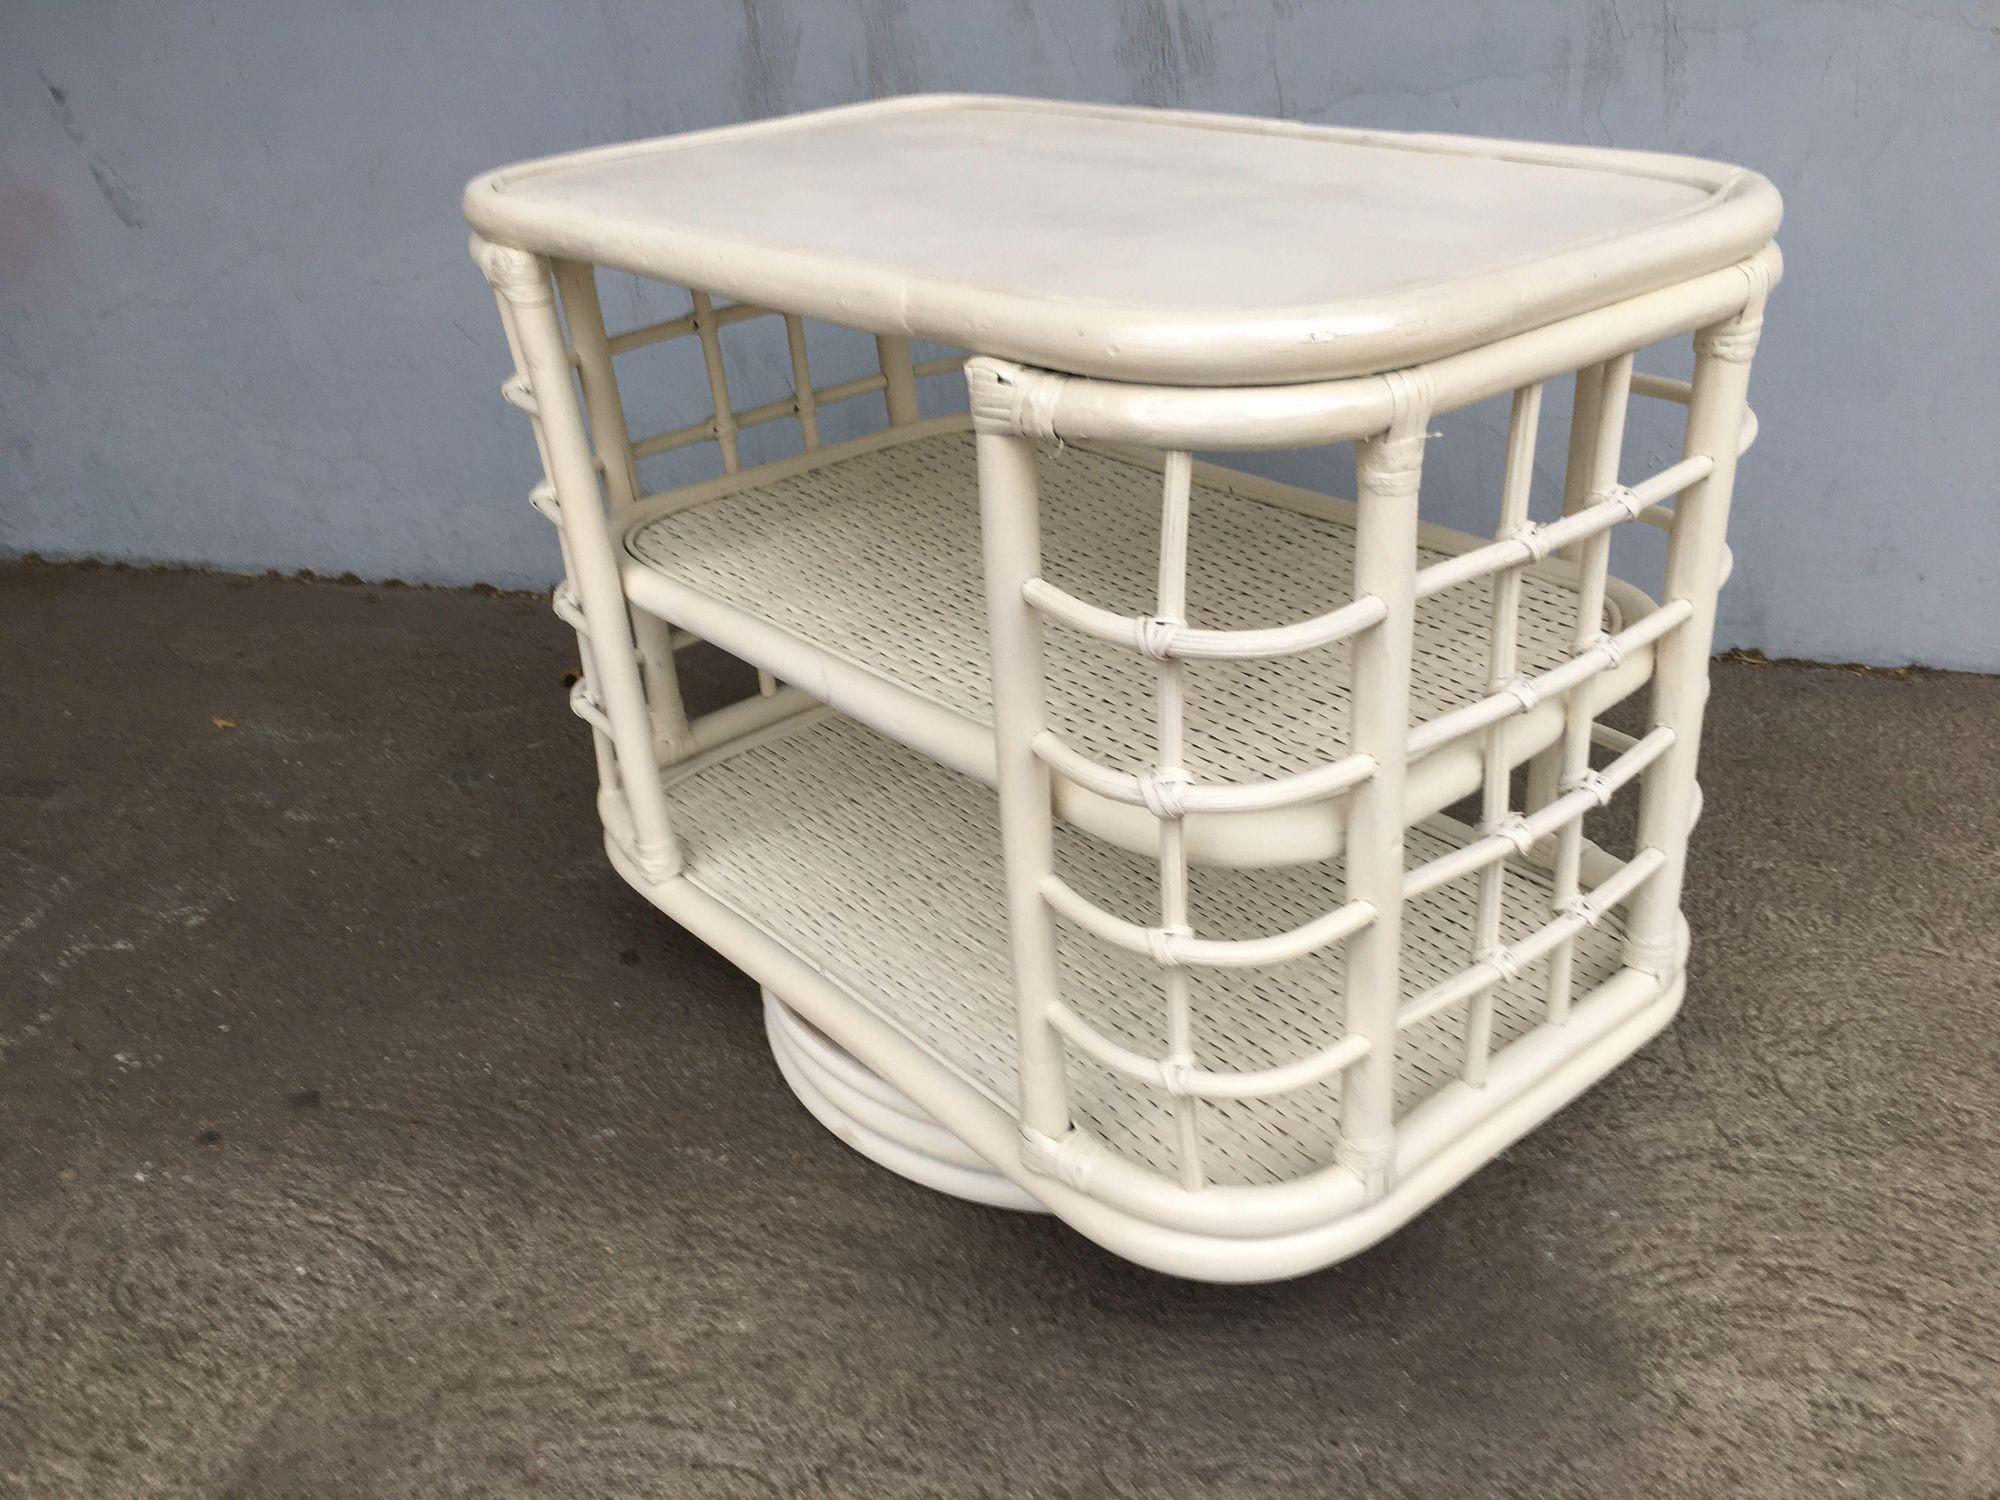 Restored White Cage Rattan Side Table Swivel Bookshelf In Excellent Condition For Sale In Van Nuys, CA